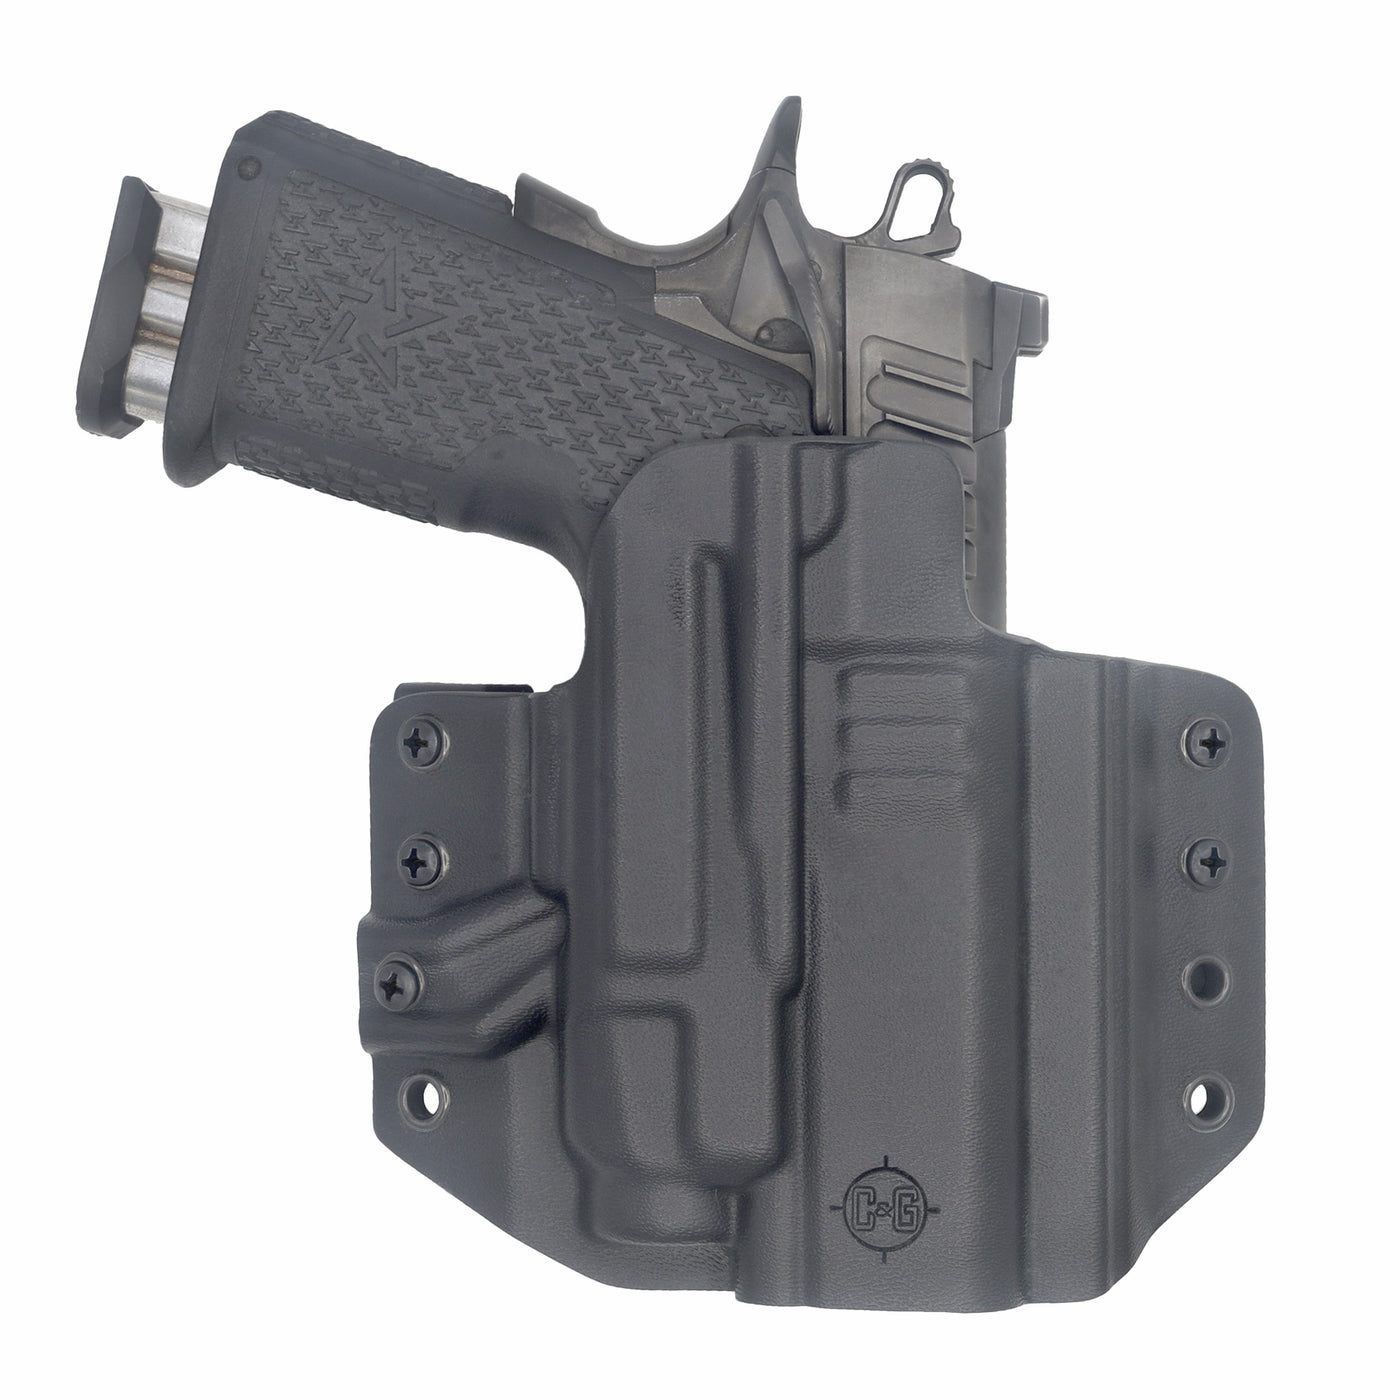 C&G Holsters custom OWB Tactical 2011 Streamlight TLR7/a in holstered position